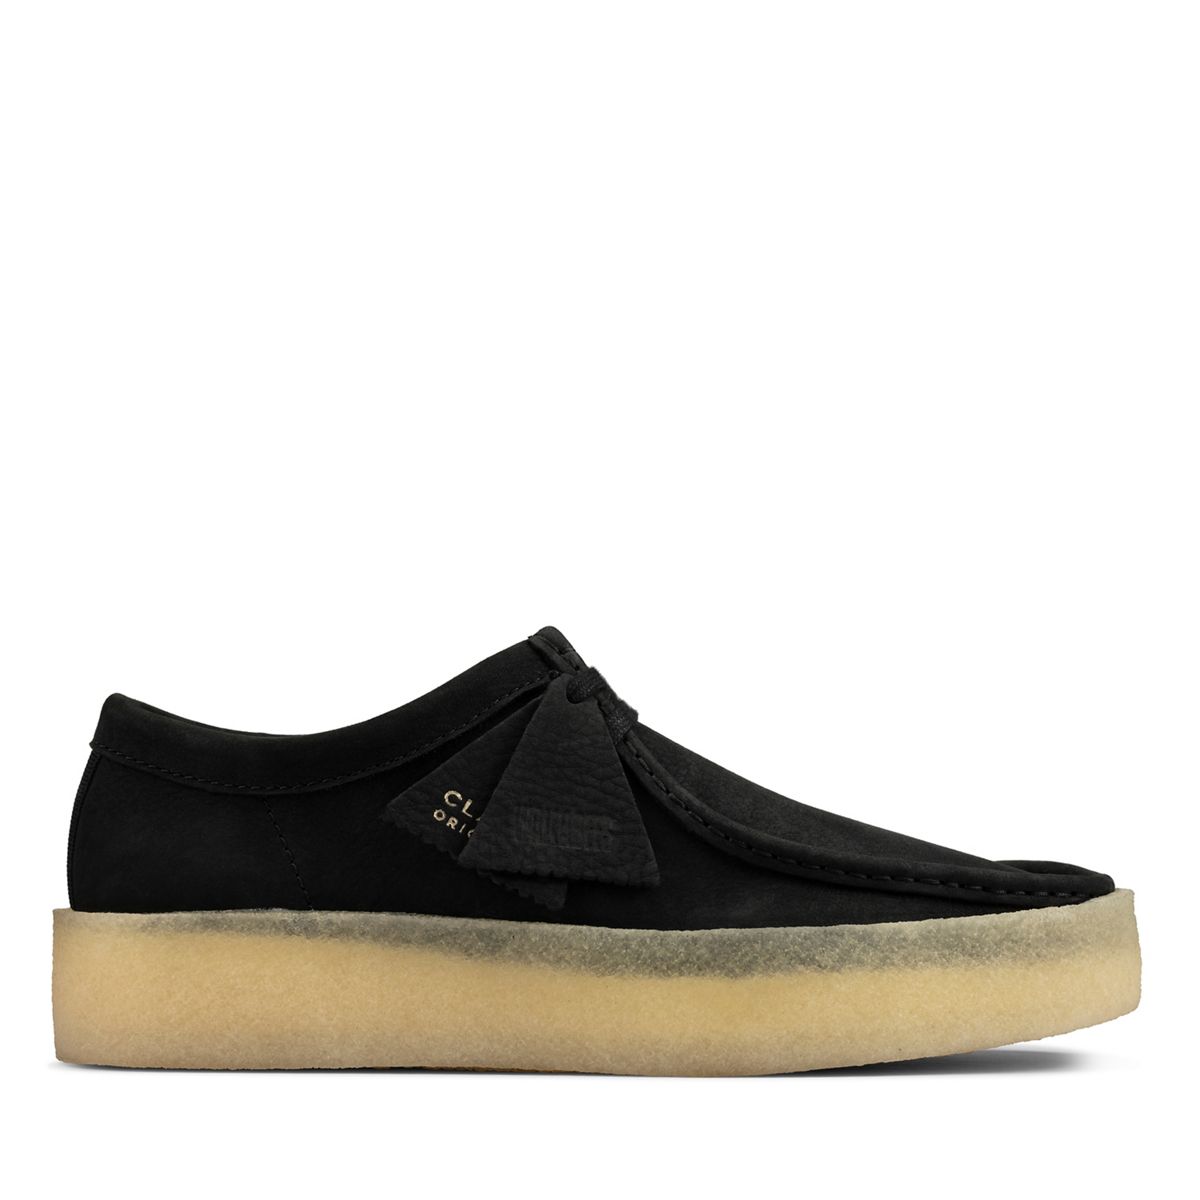 Cup Black Nubuck - Clarks Canada Official Site | Clarks Shoes